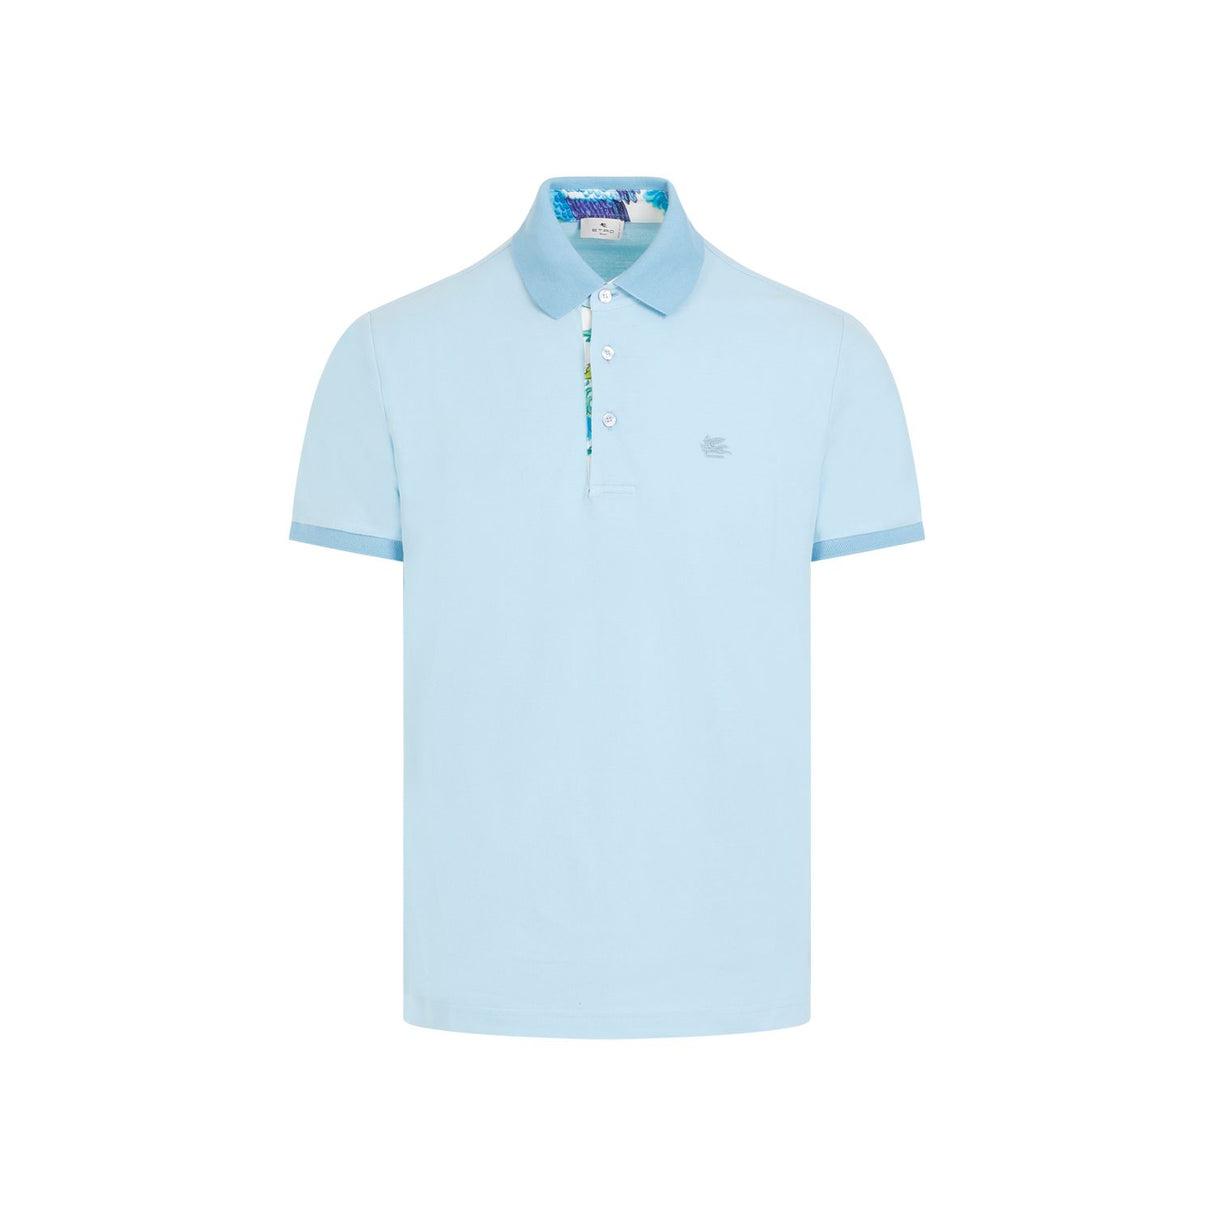 ETRO Blue Printed Rome Polo for Men - SS24 Edition